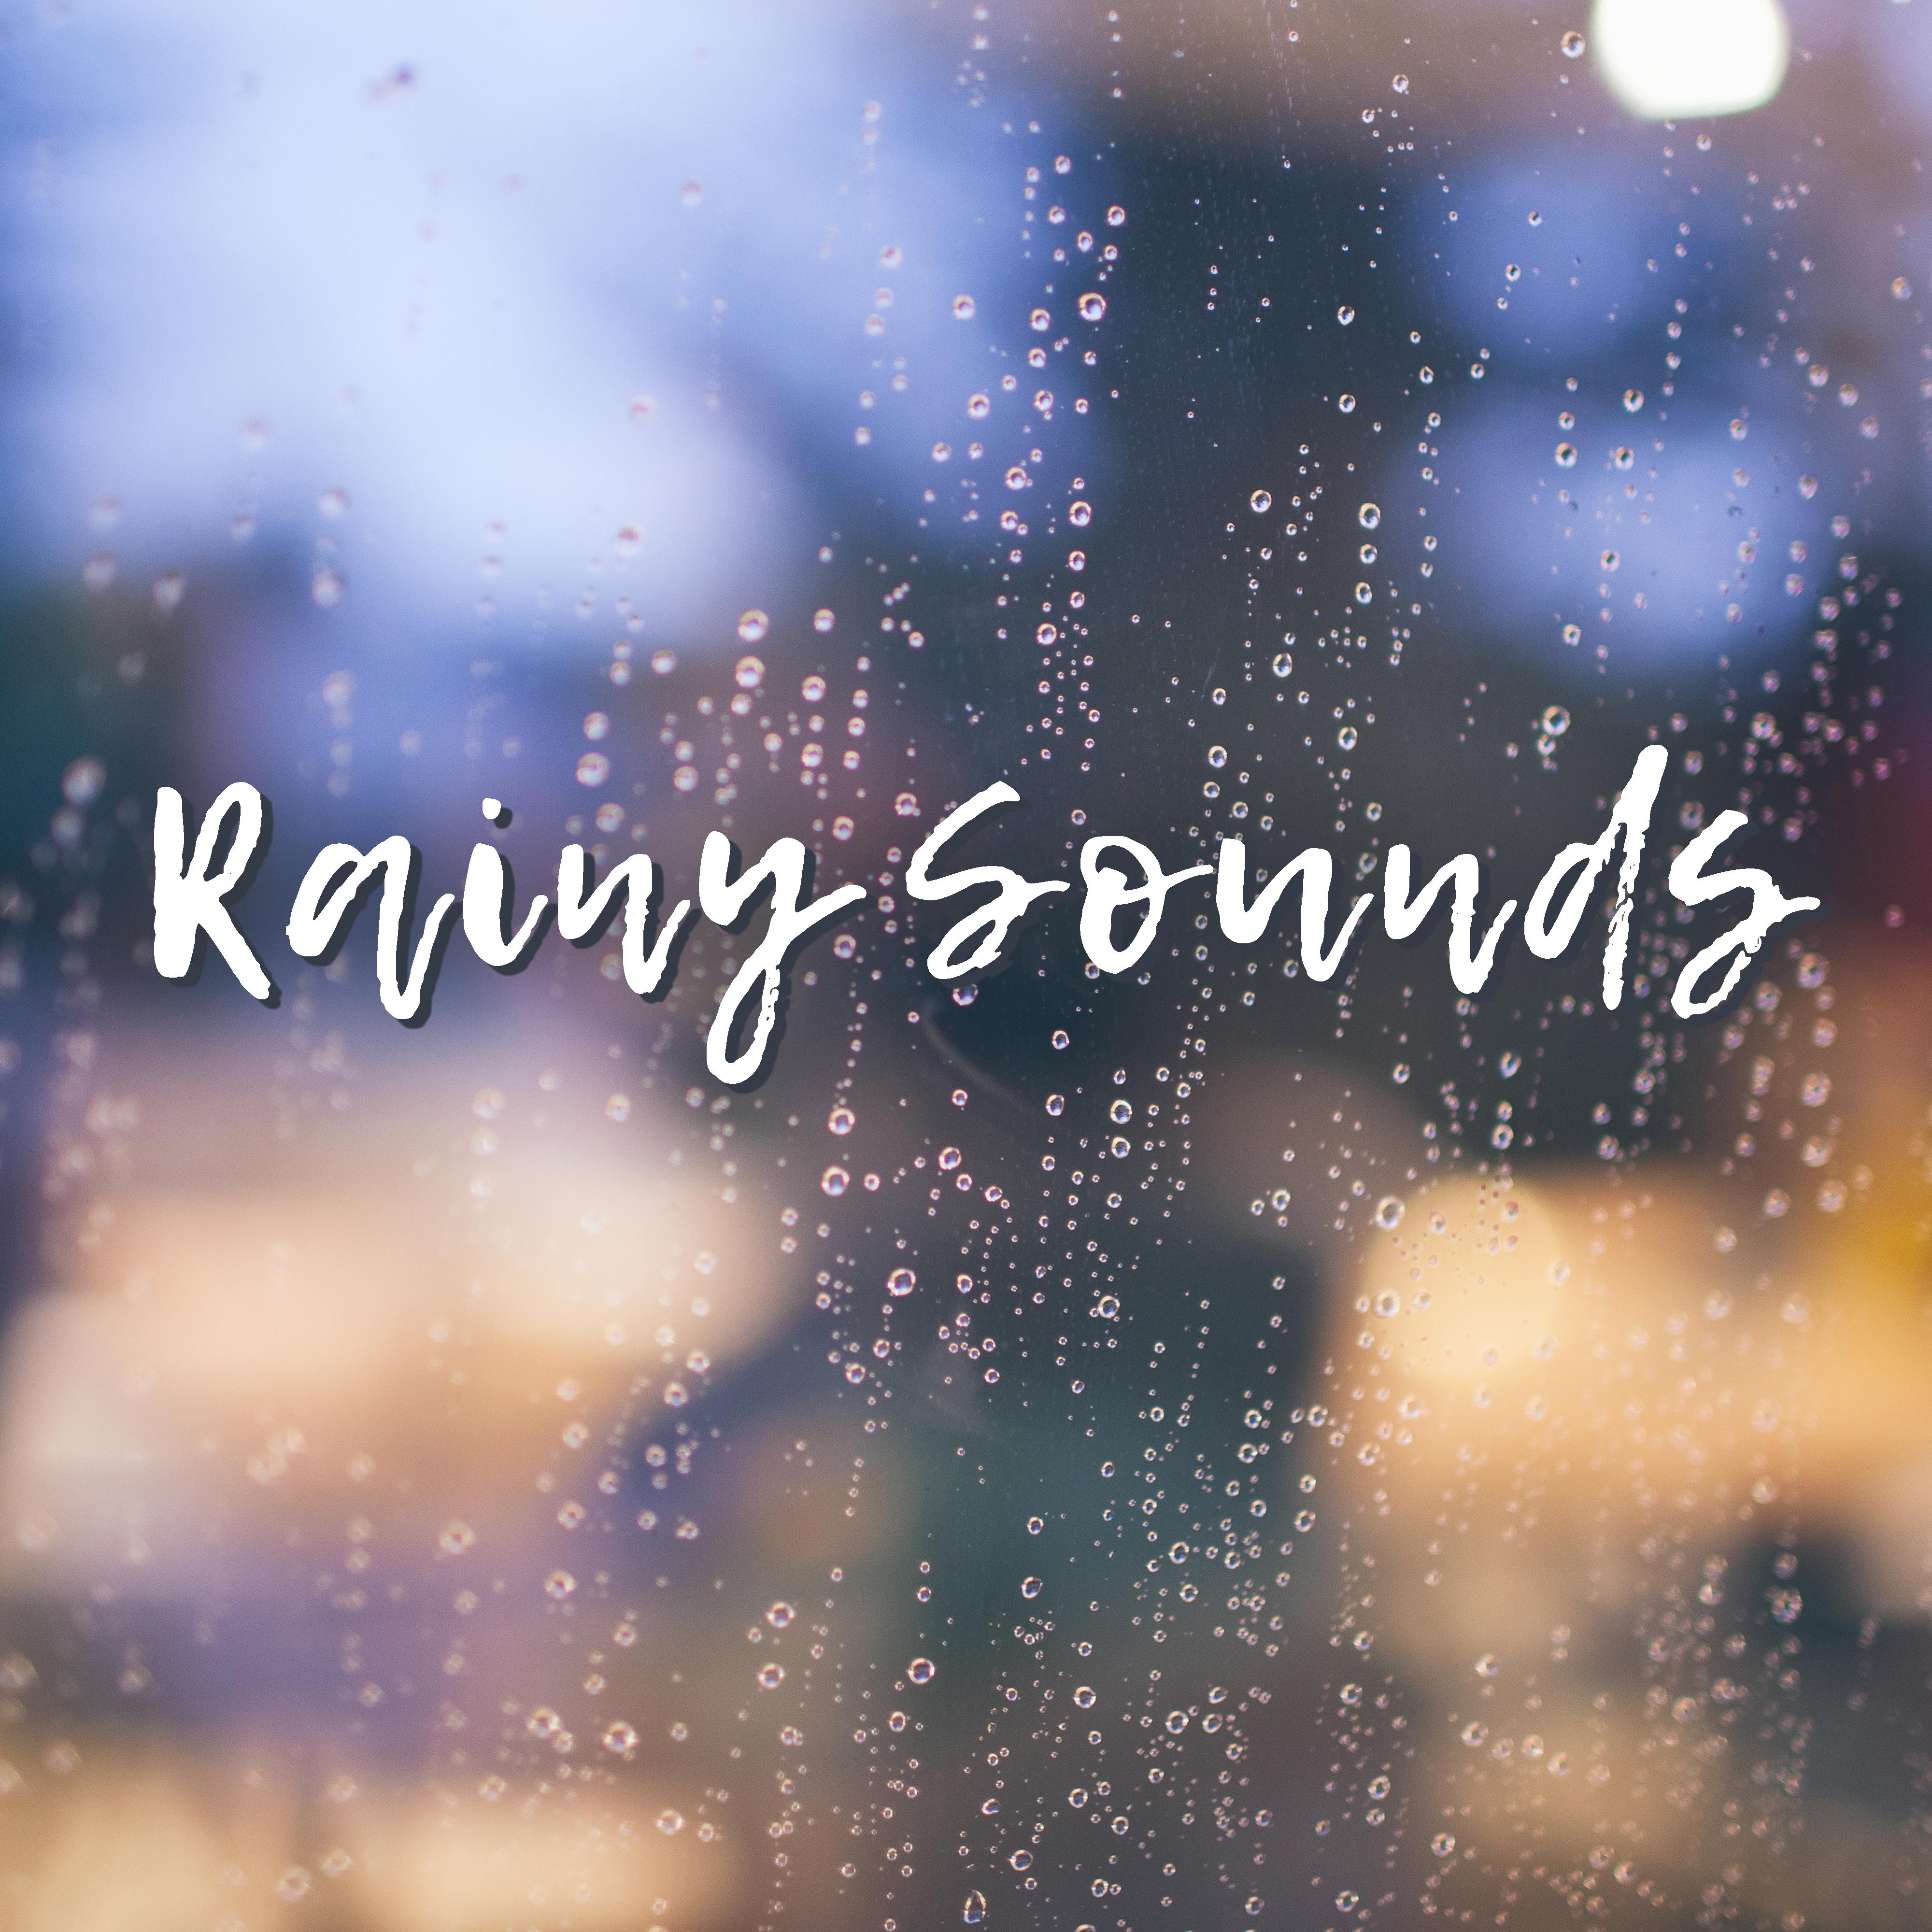 Rainy Sounds – Pure Relaxation, Nature Sounds, Anti – Stress Music Therapy, Zen, Healing Bliss